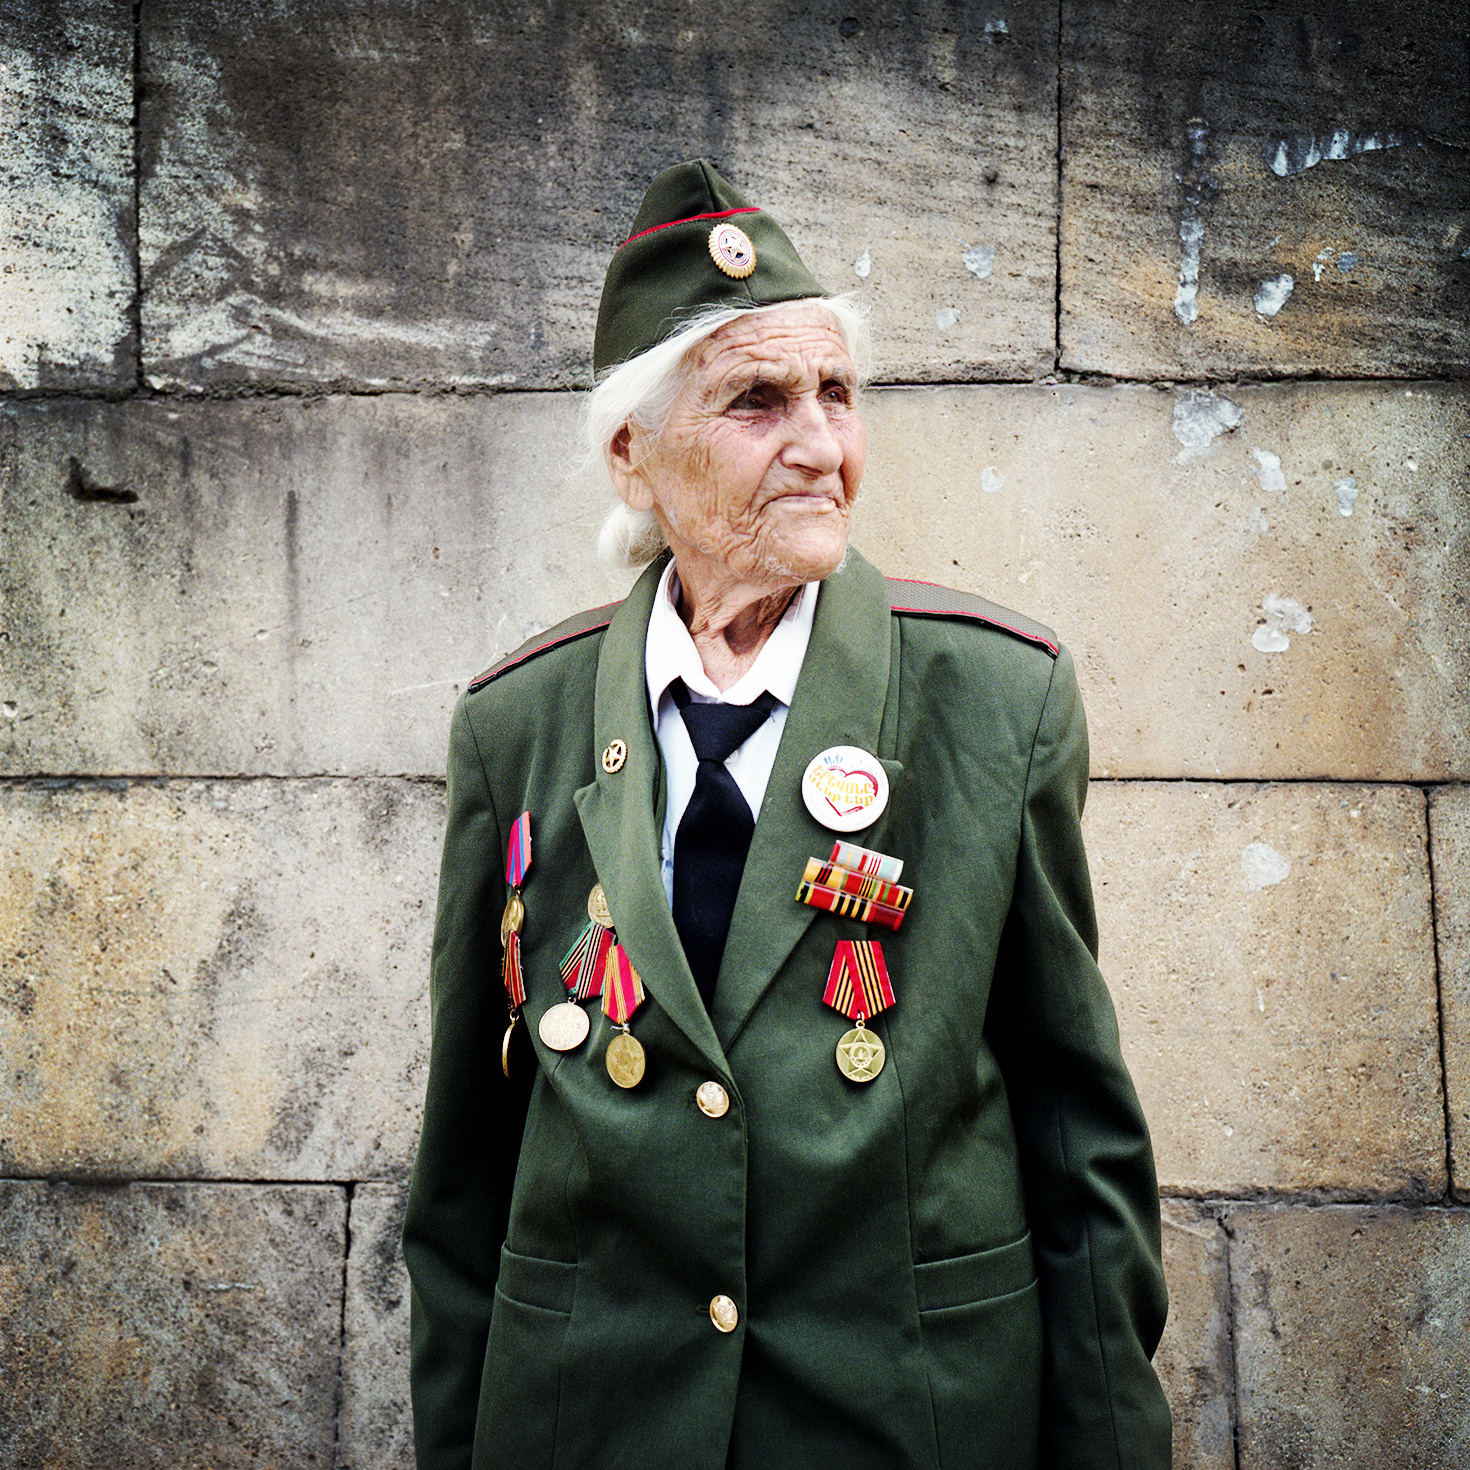  A veteran from the Great Patriotic War with her medals, the day of the commemoration of the 20th anniversary of the independence of Nagorno-Karabagh 